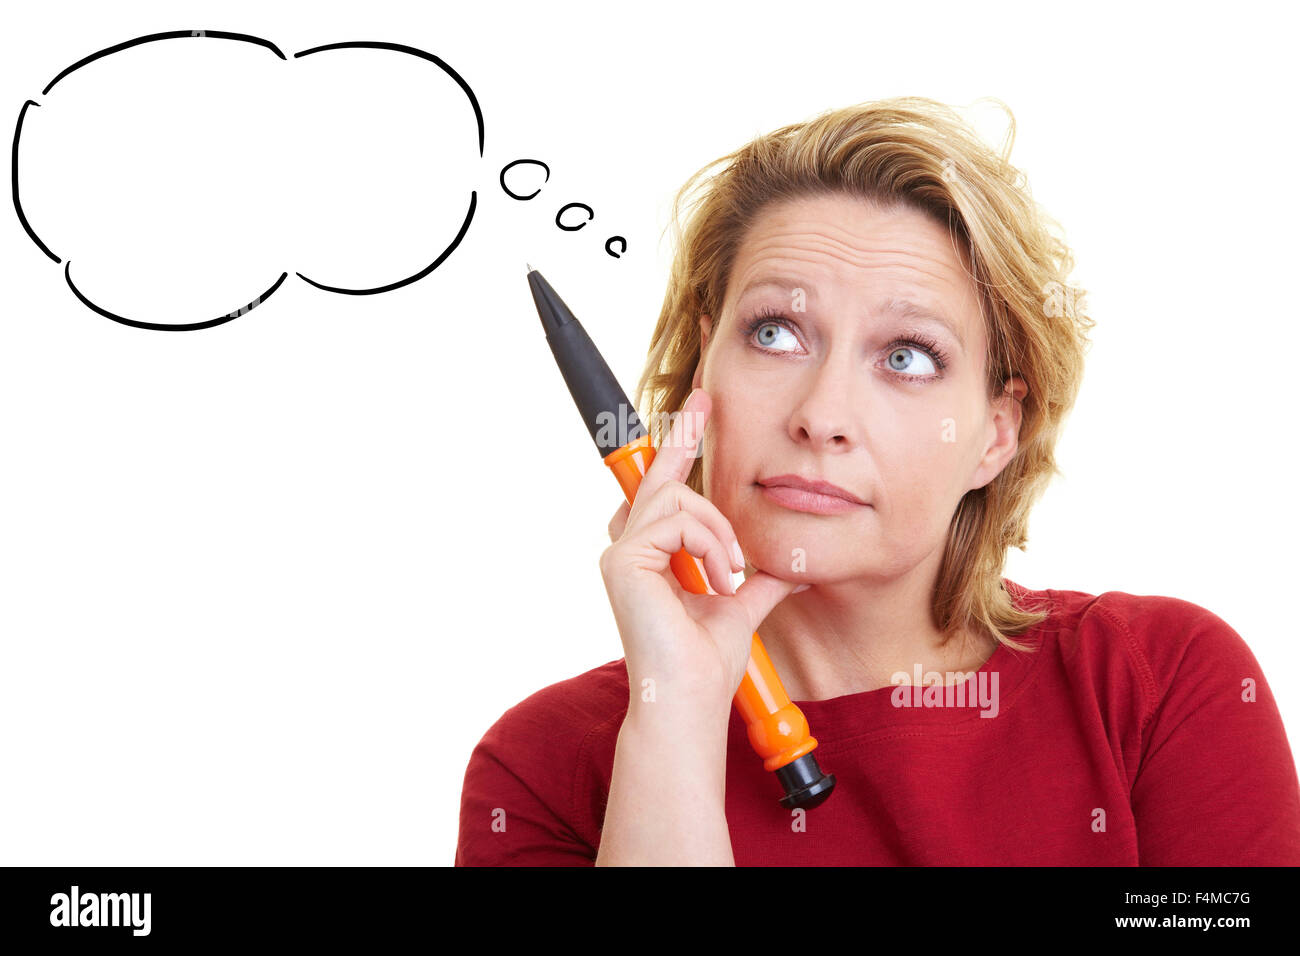 Woman with comic thought bubble holding oversized pen Stock Photo